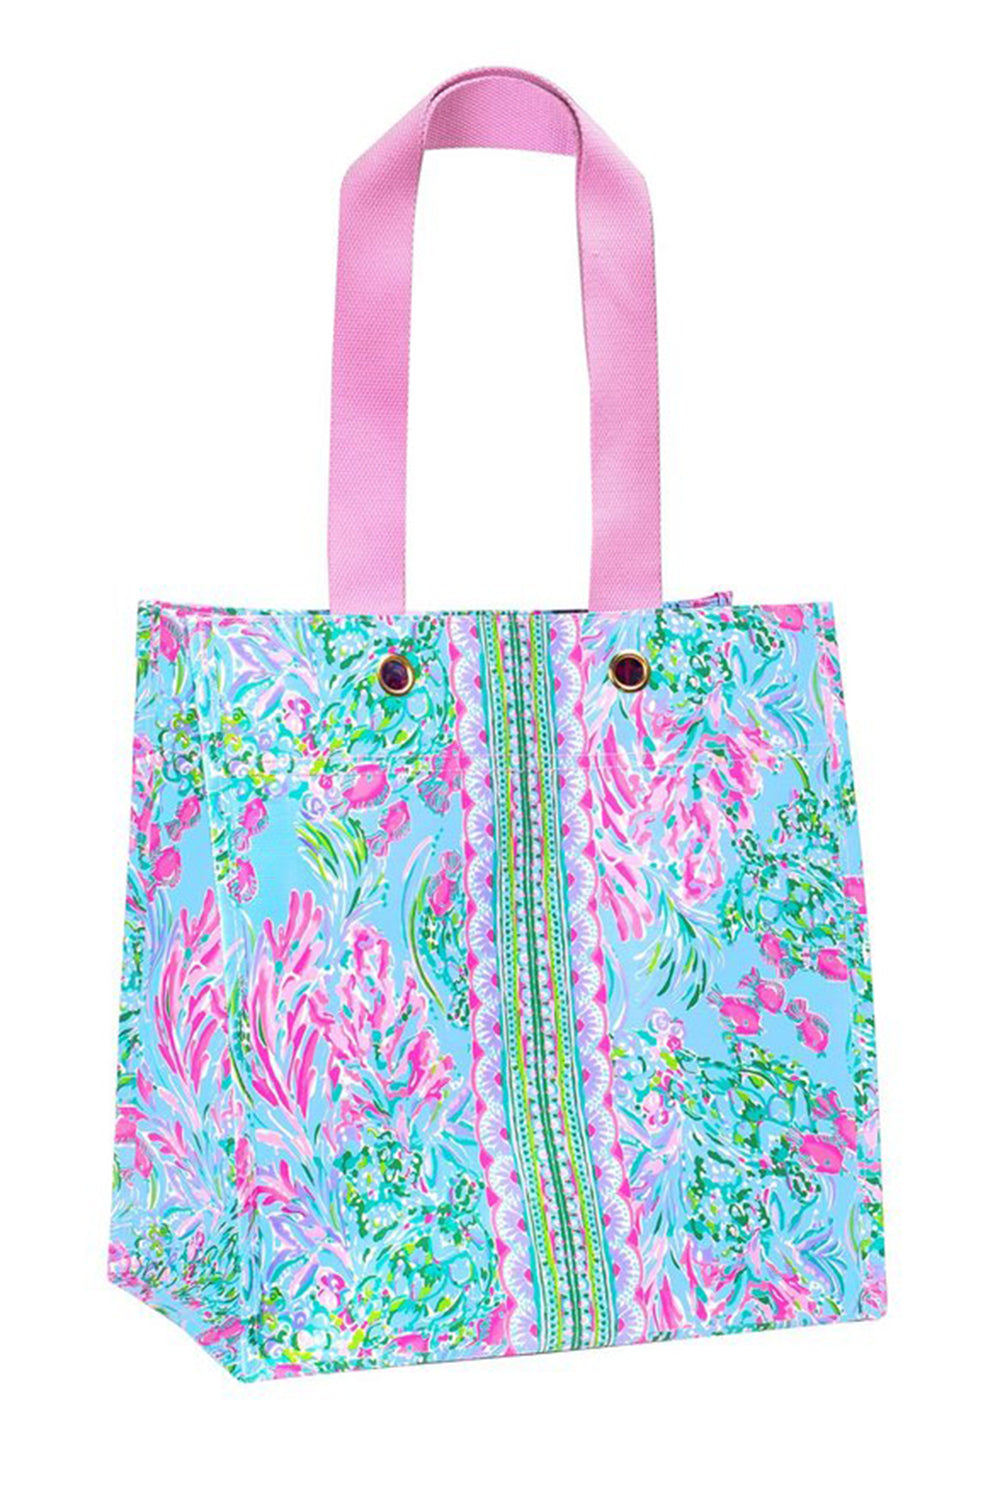 Lilly Pulitzer Market Shopper Tote - Best Fishes